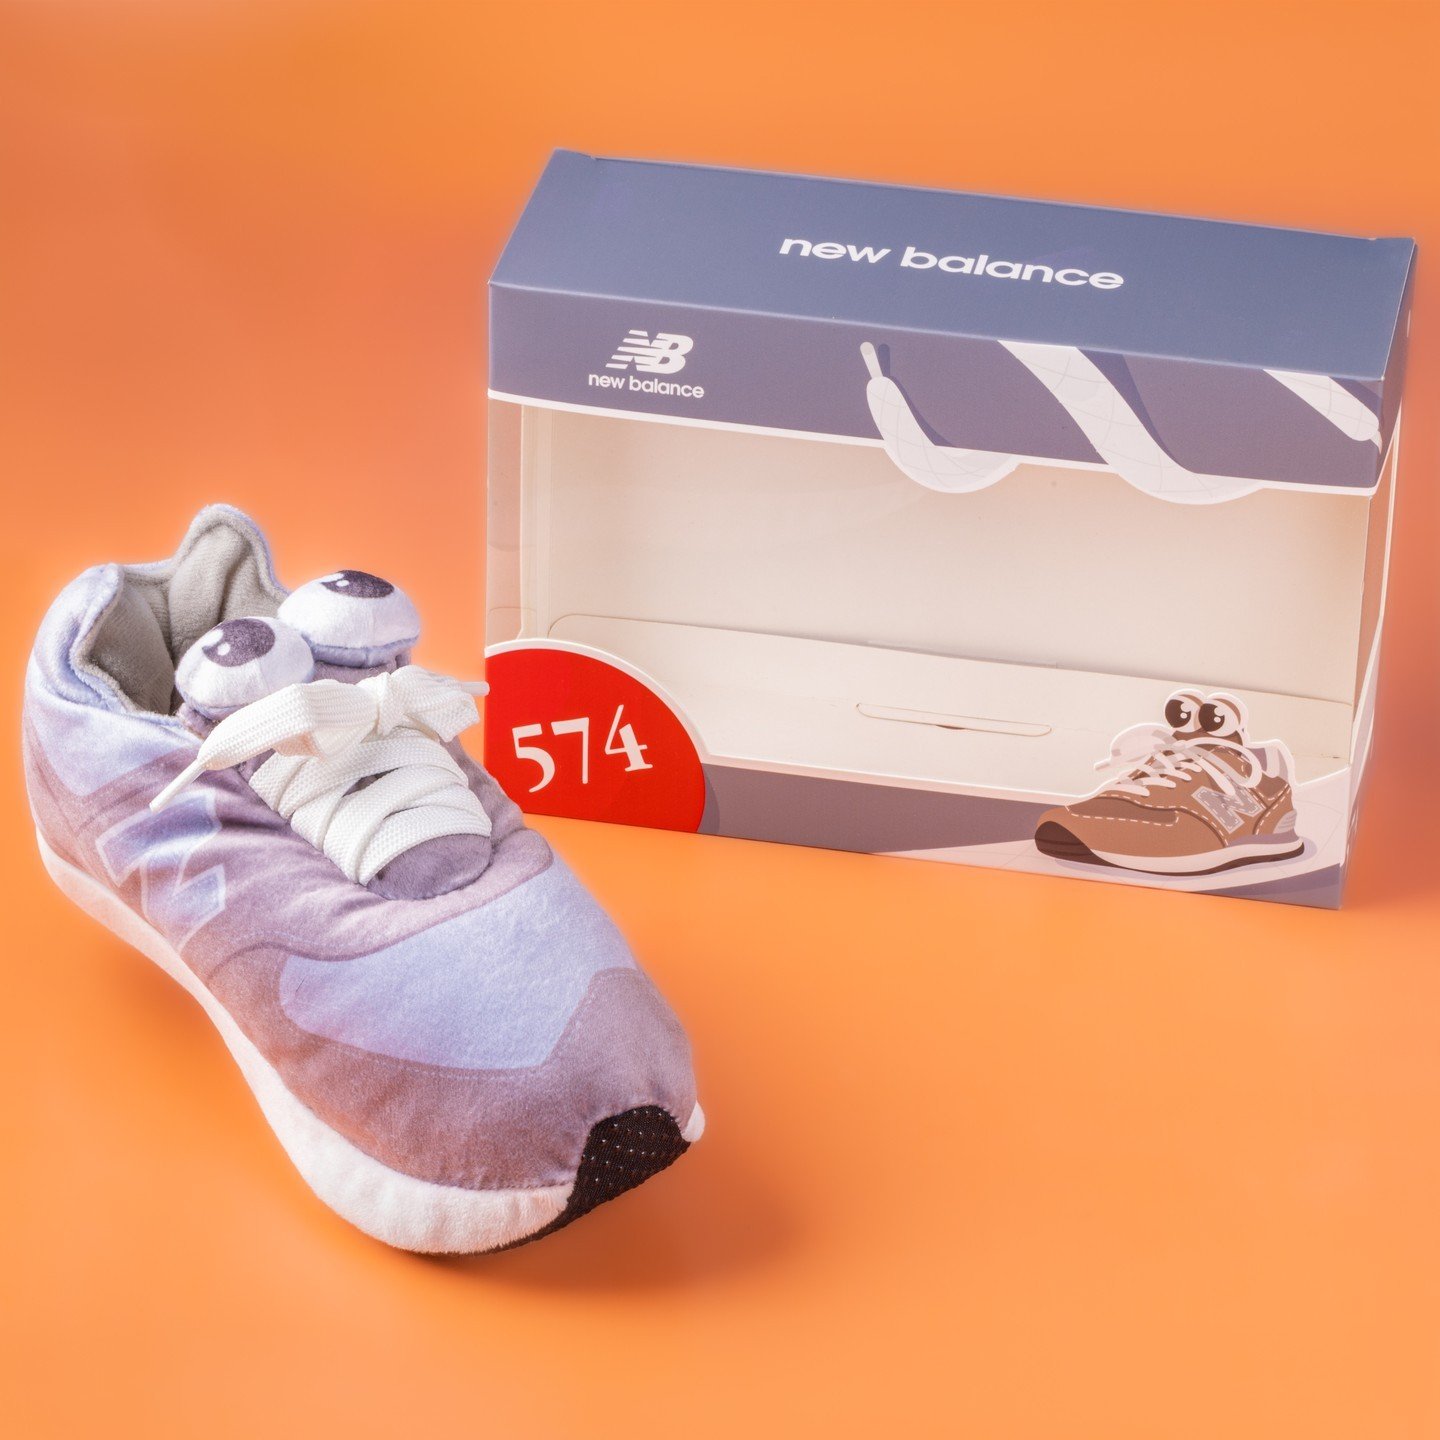 Custom-made plush toys for New Balance: Enhance your brand's appeal with a unique product transformation. Ready to transform your brand's image with custom plush toys? Get a quote today!

#NewBalancePlush #PlushToys #CustomToys #BrandMerchandise #Bra